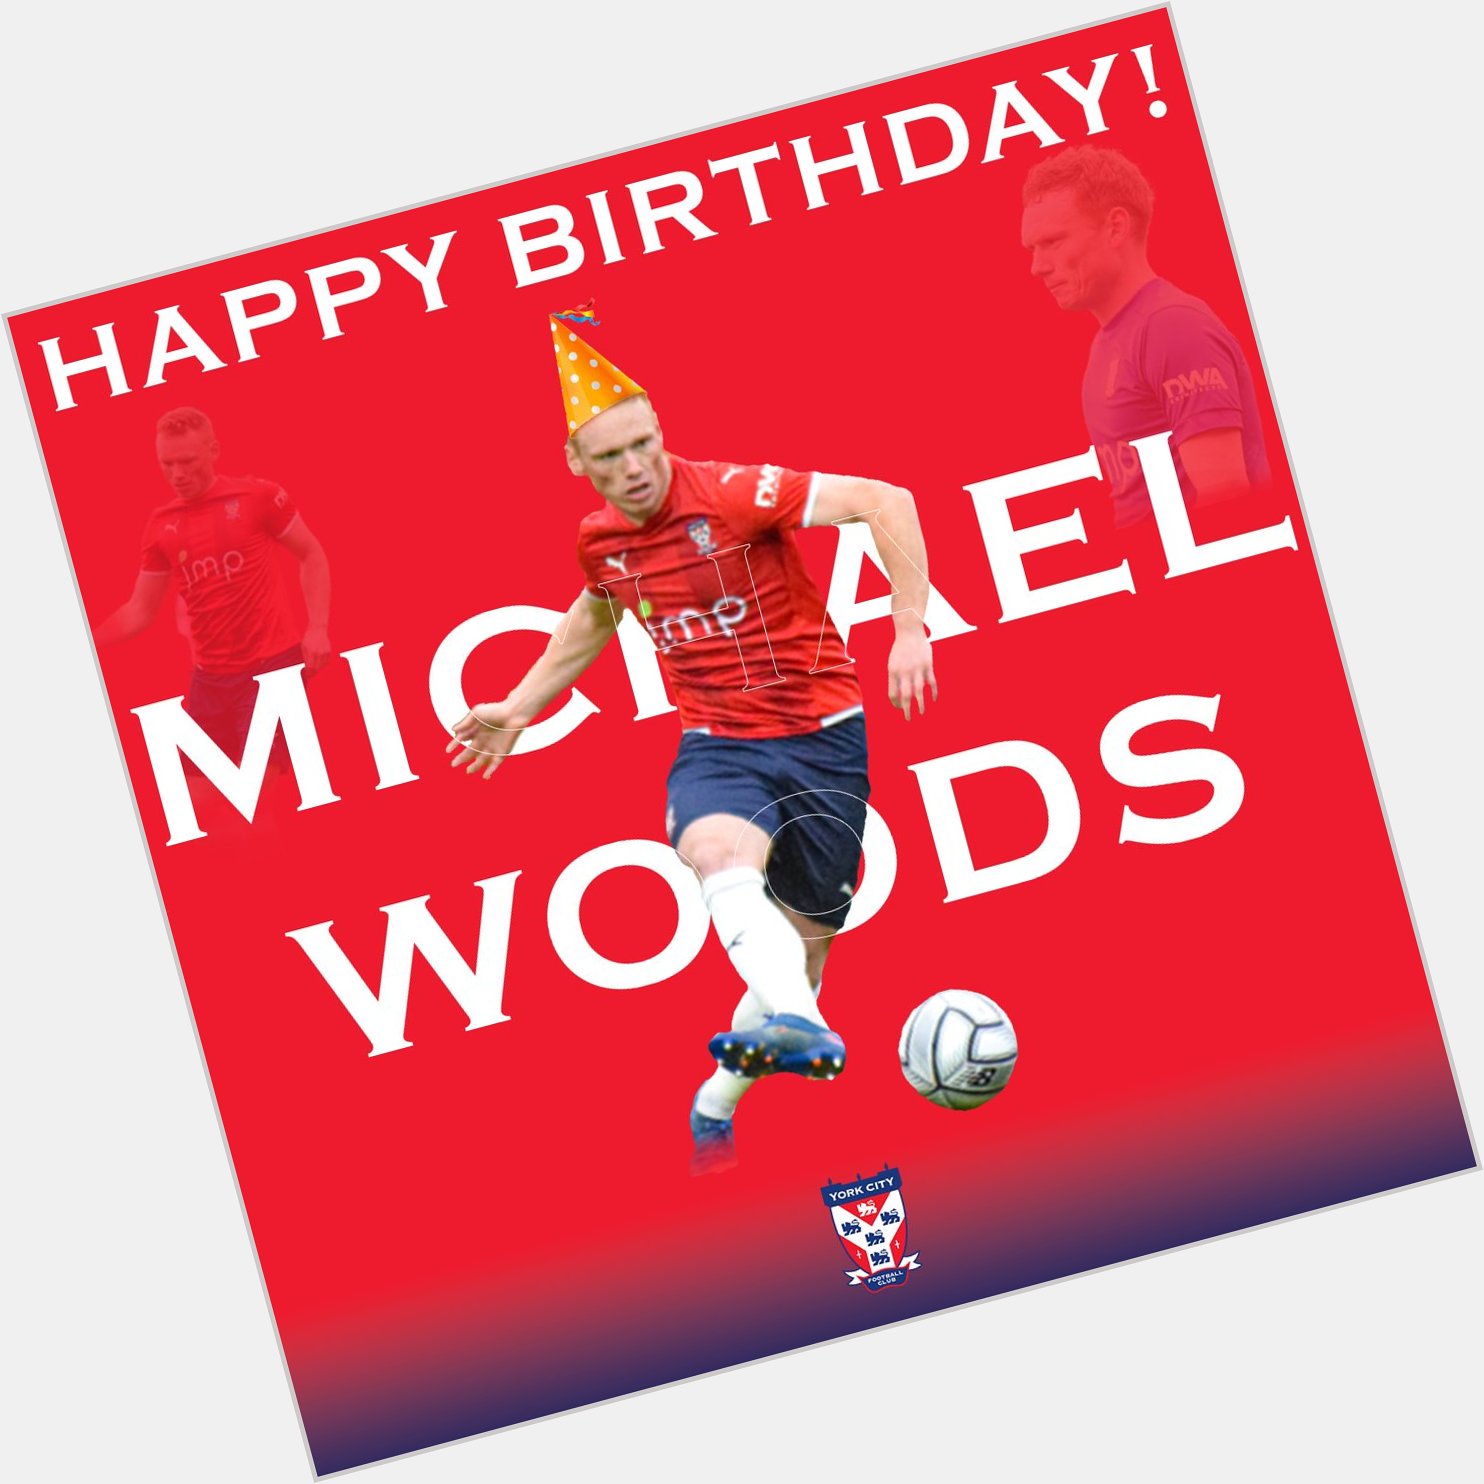  Happy Birthday to Michael Woods, who turns 32 today!

Have good one,  